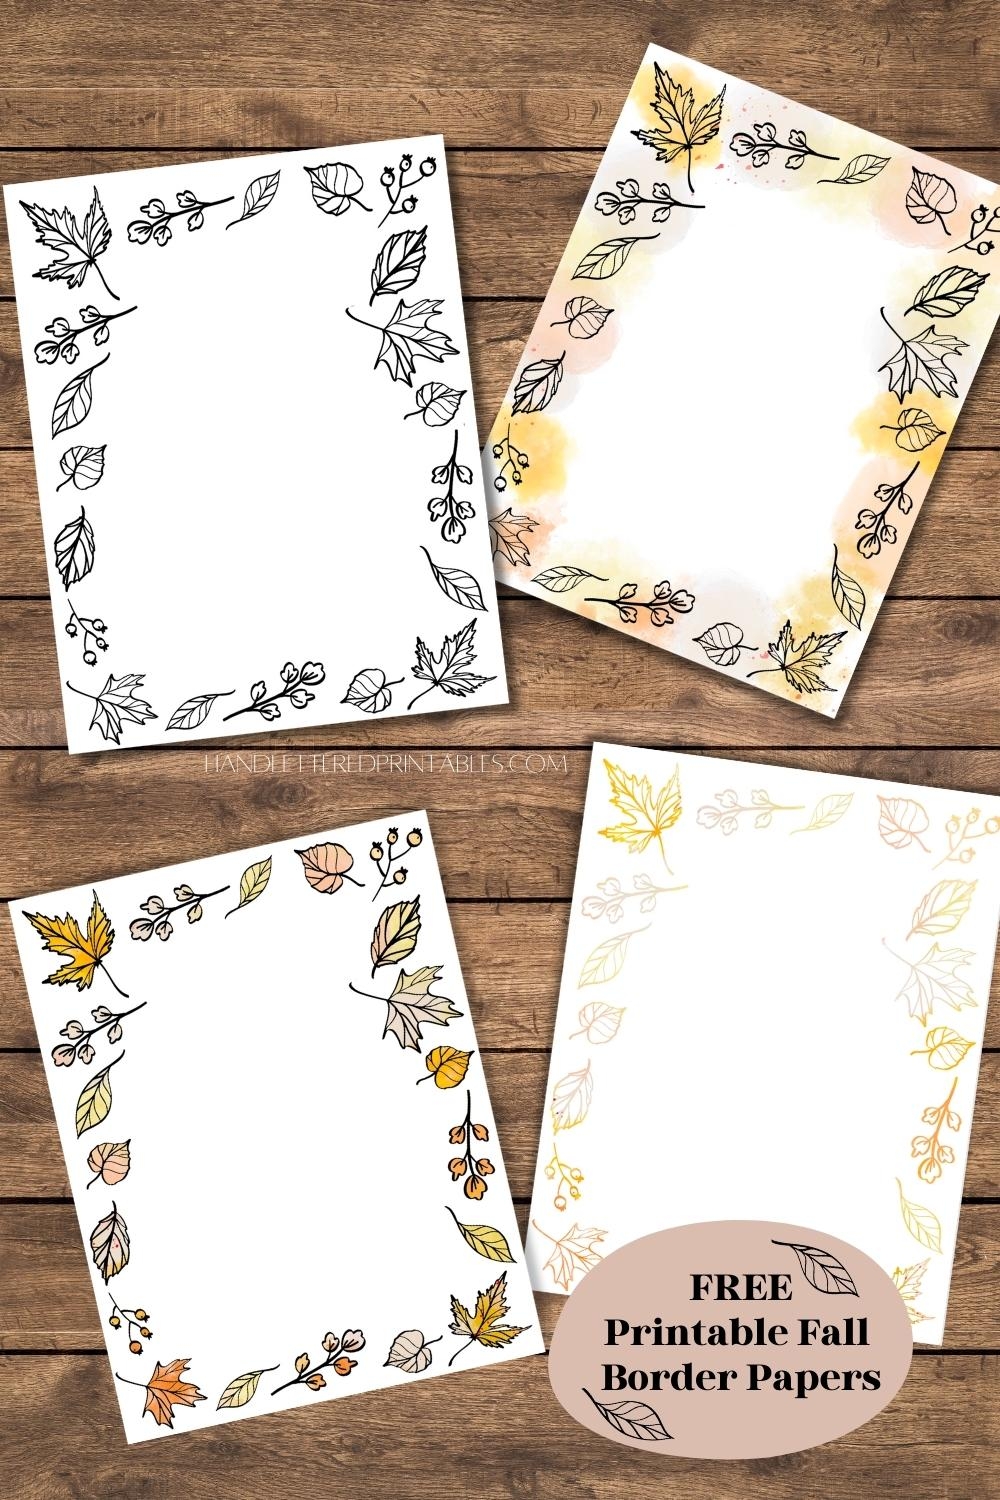 Fall Borders Free Printable Paper With Autumn Leaves Hand Lettered Printables - Free Printable Autumn Paper